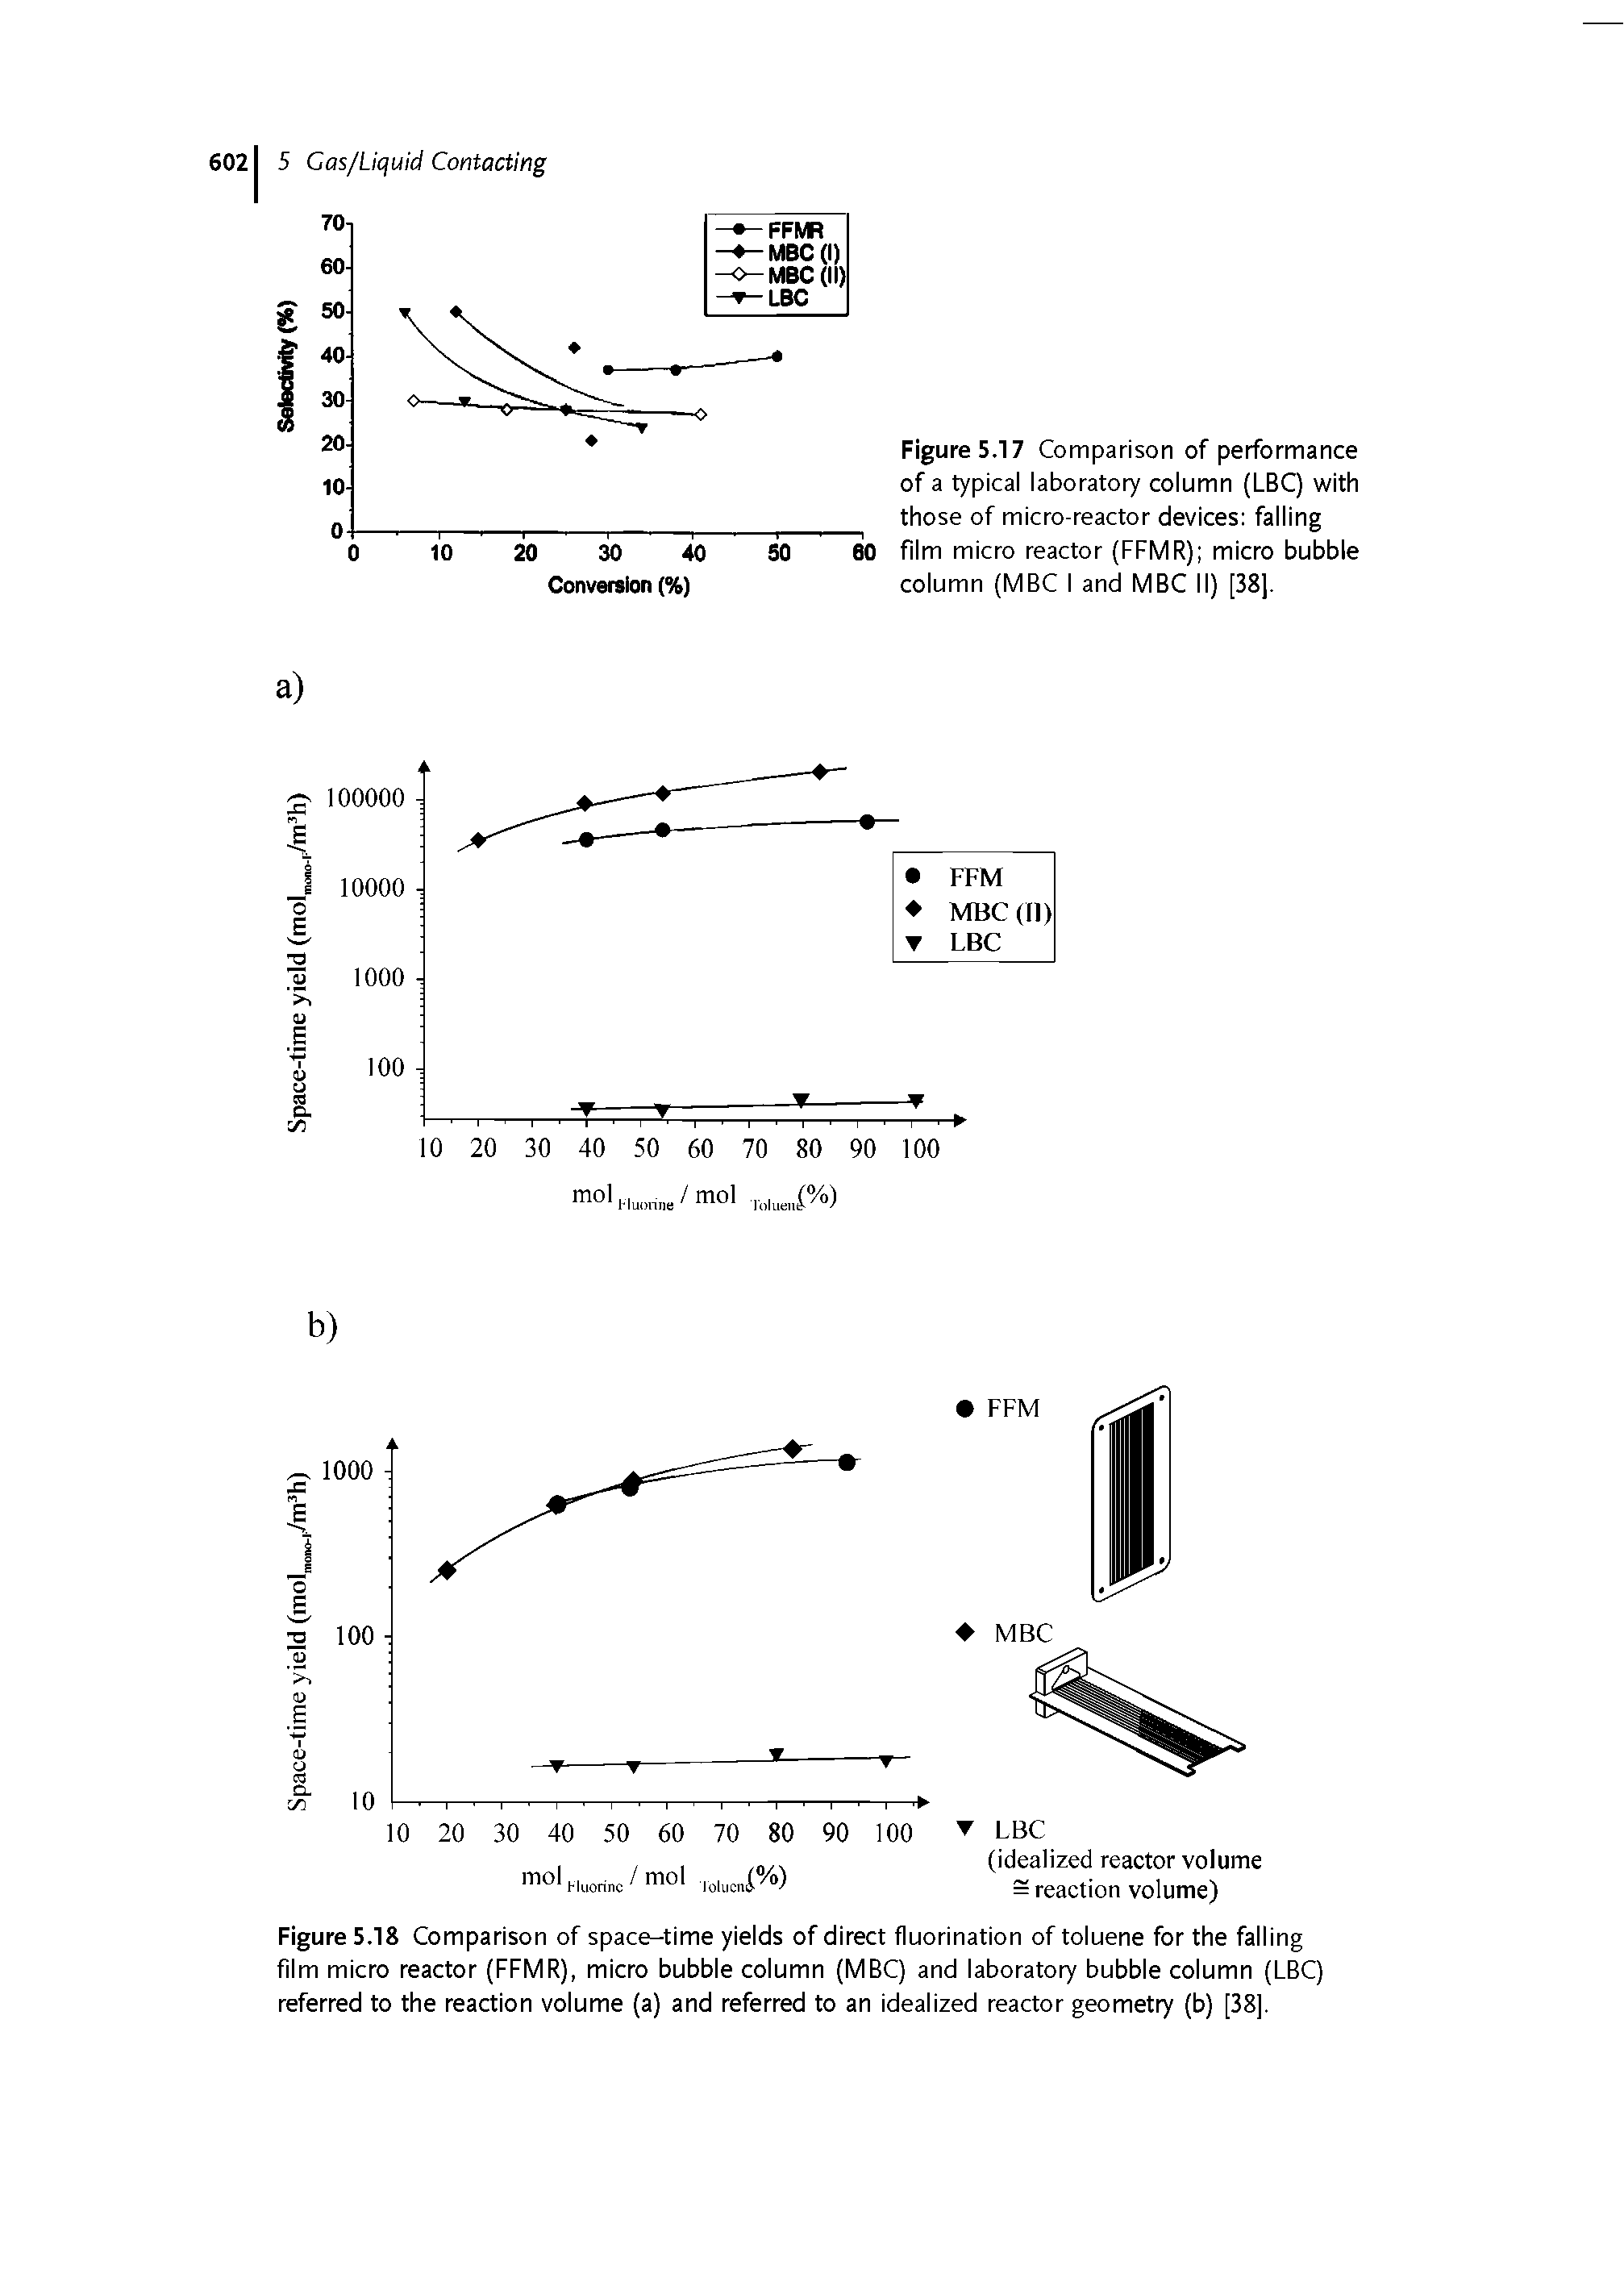 Figure 5.17 Comparison of performance of a typical laboratory column (LBC) with those of micro-reactor devices falling film micro reactor (FFMR) micro bubble column (MBC I and MBC II) [38].